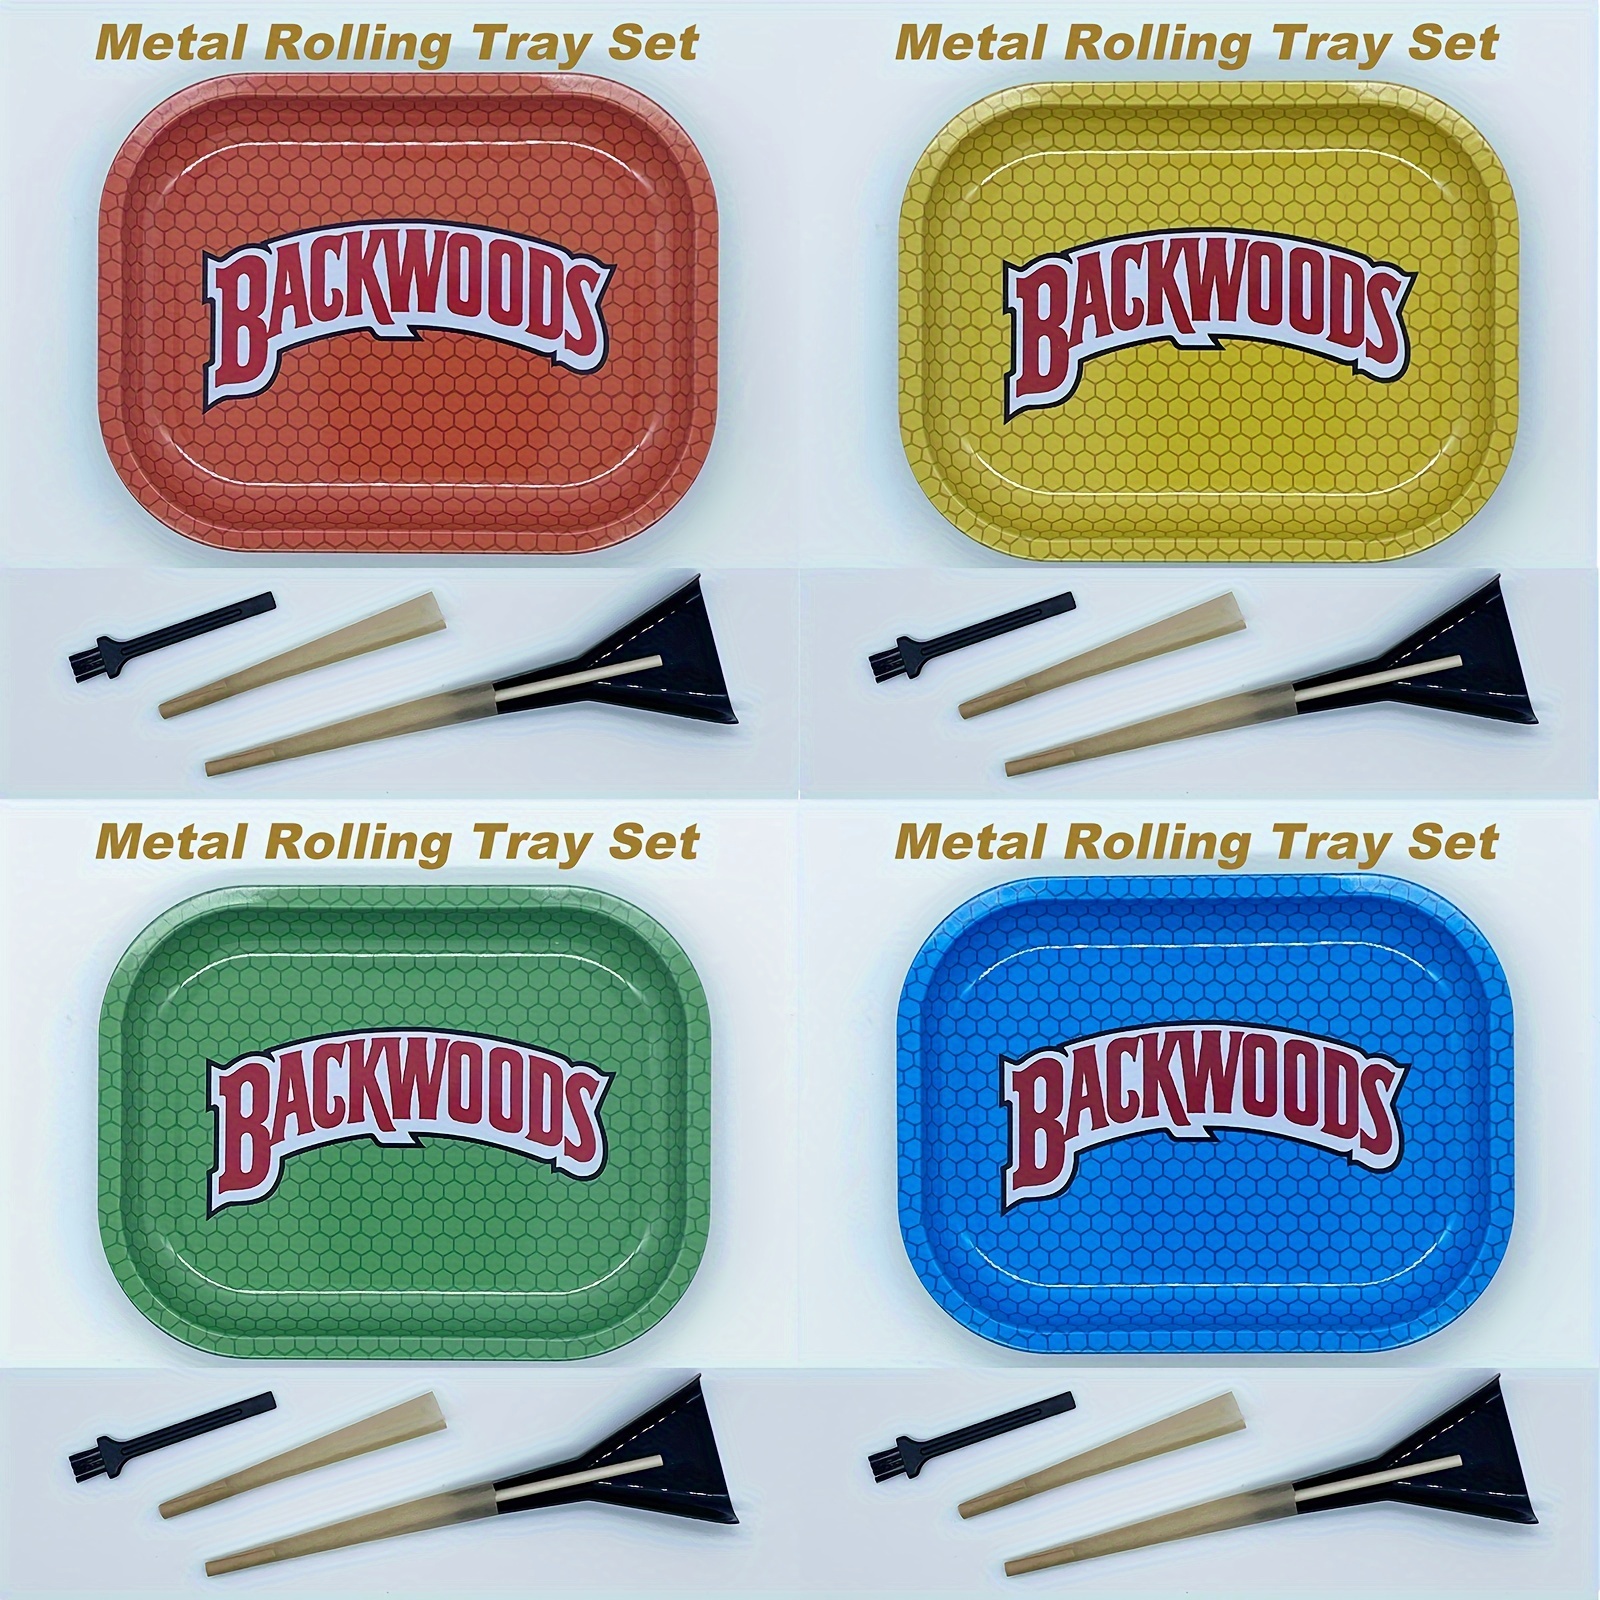 Smoking Mini Red Rolling Tray from Smoking Rolling Papers